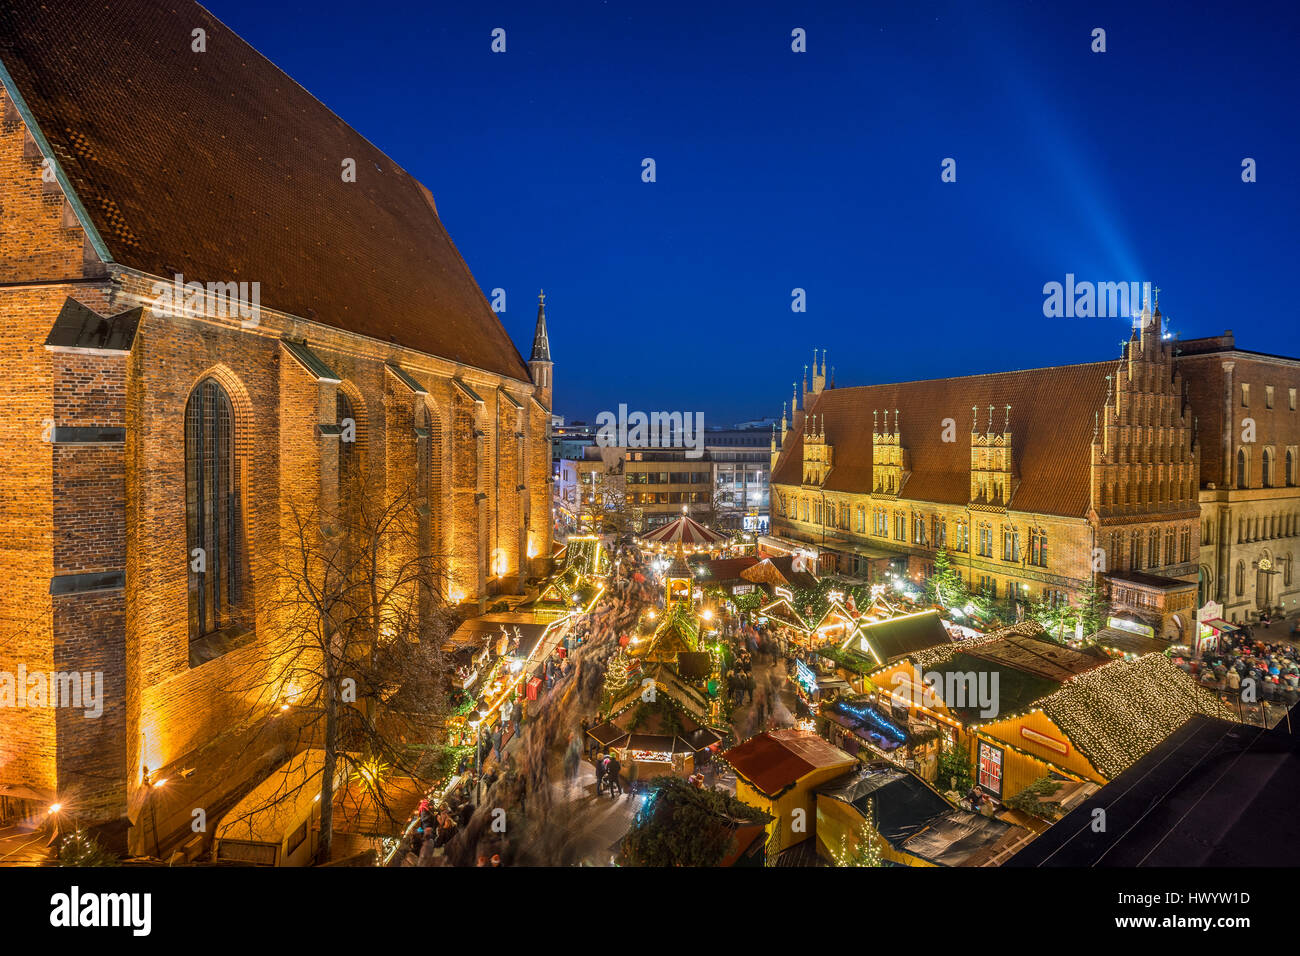 Germany, Hannover, Christmas market in the old town Stock Photo